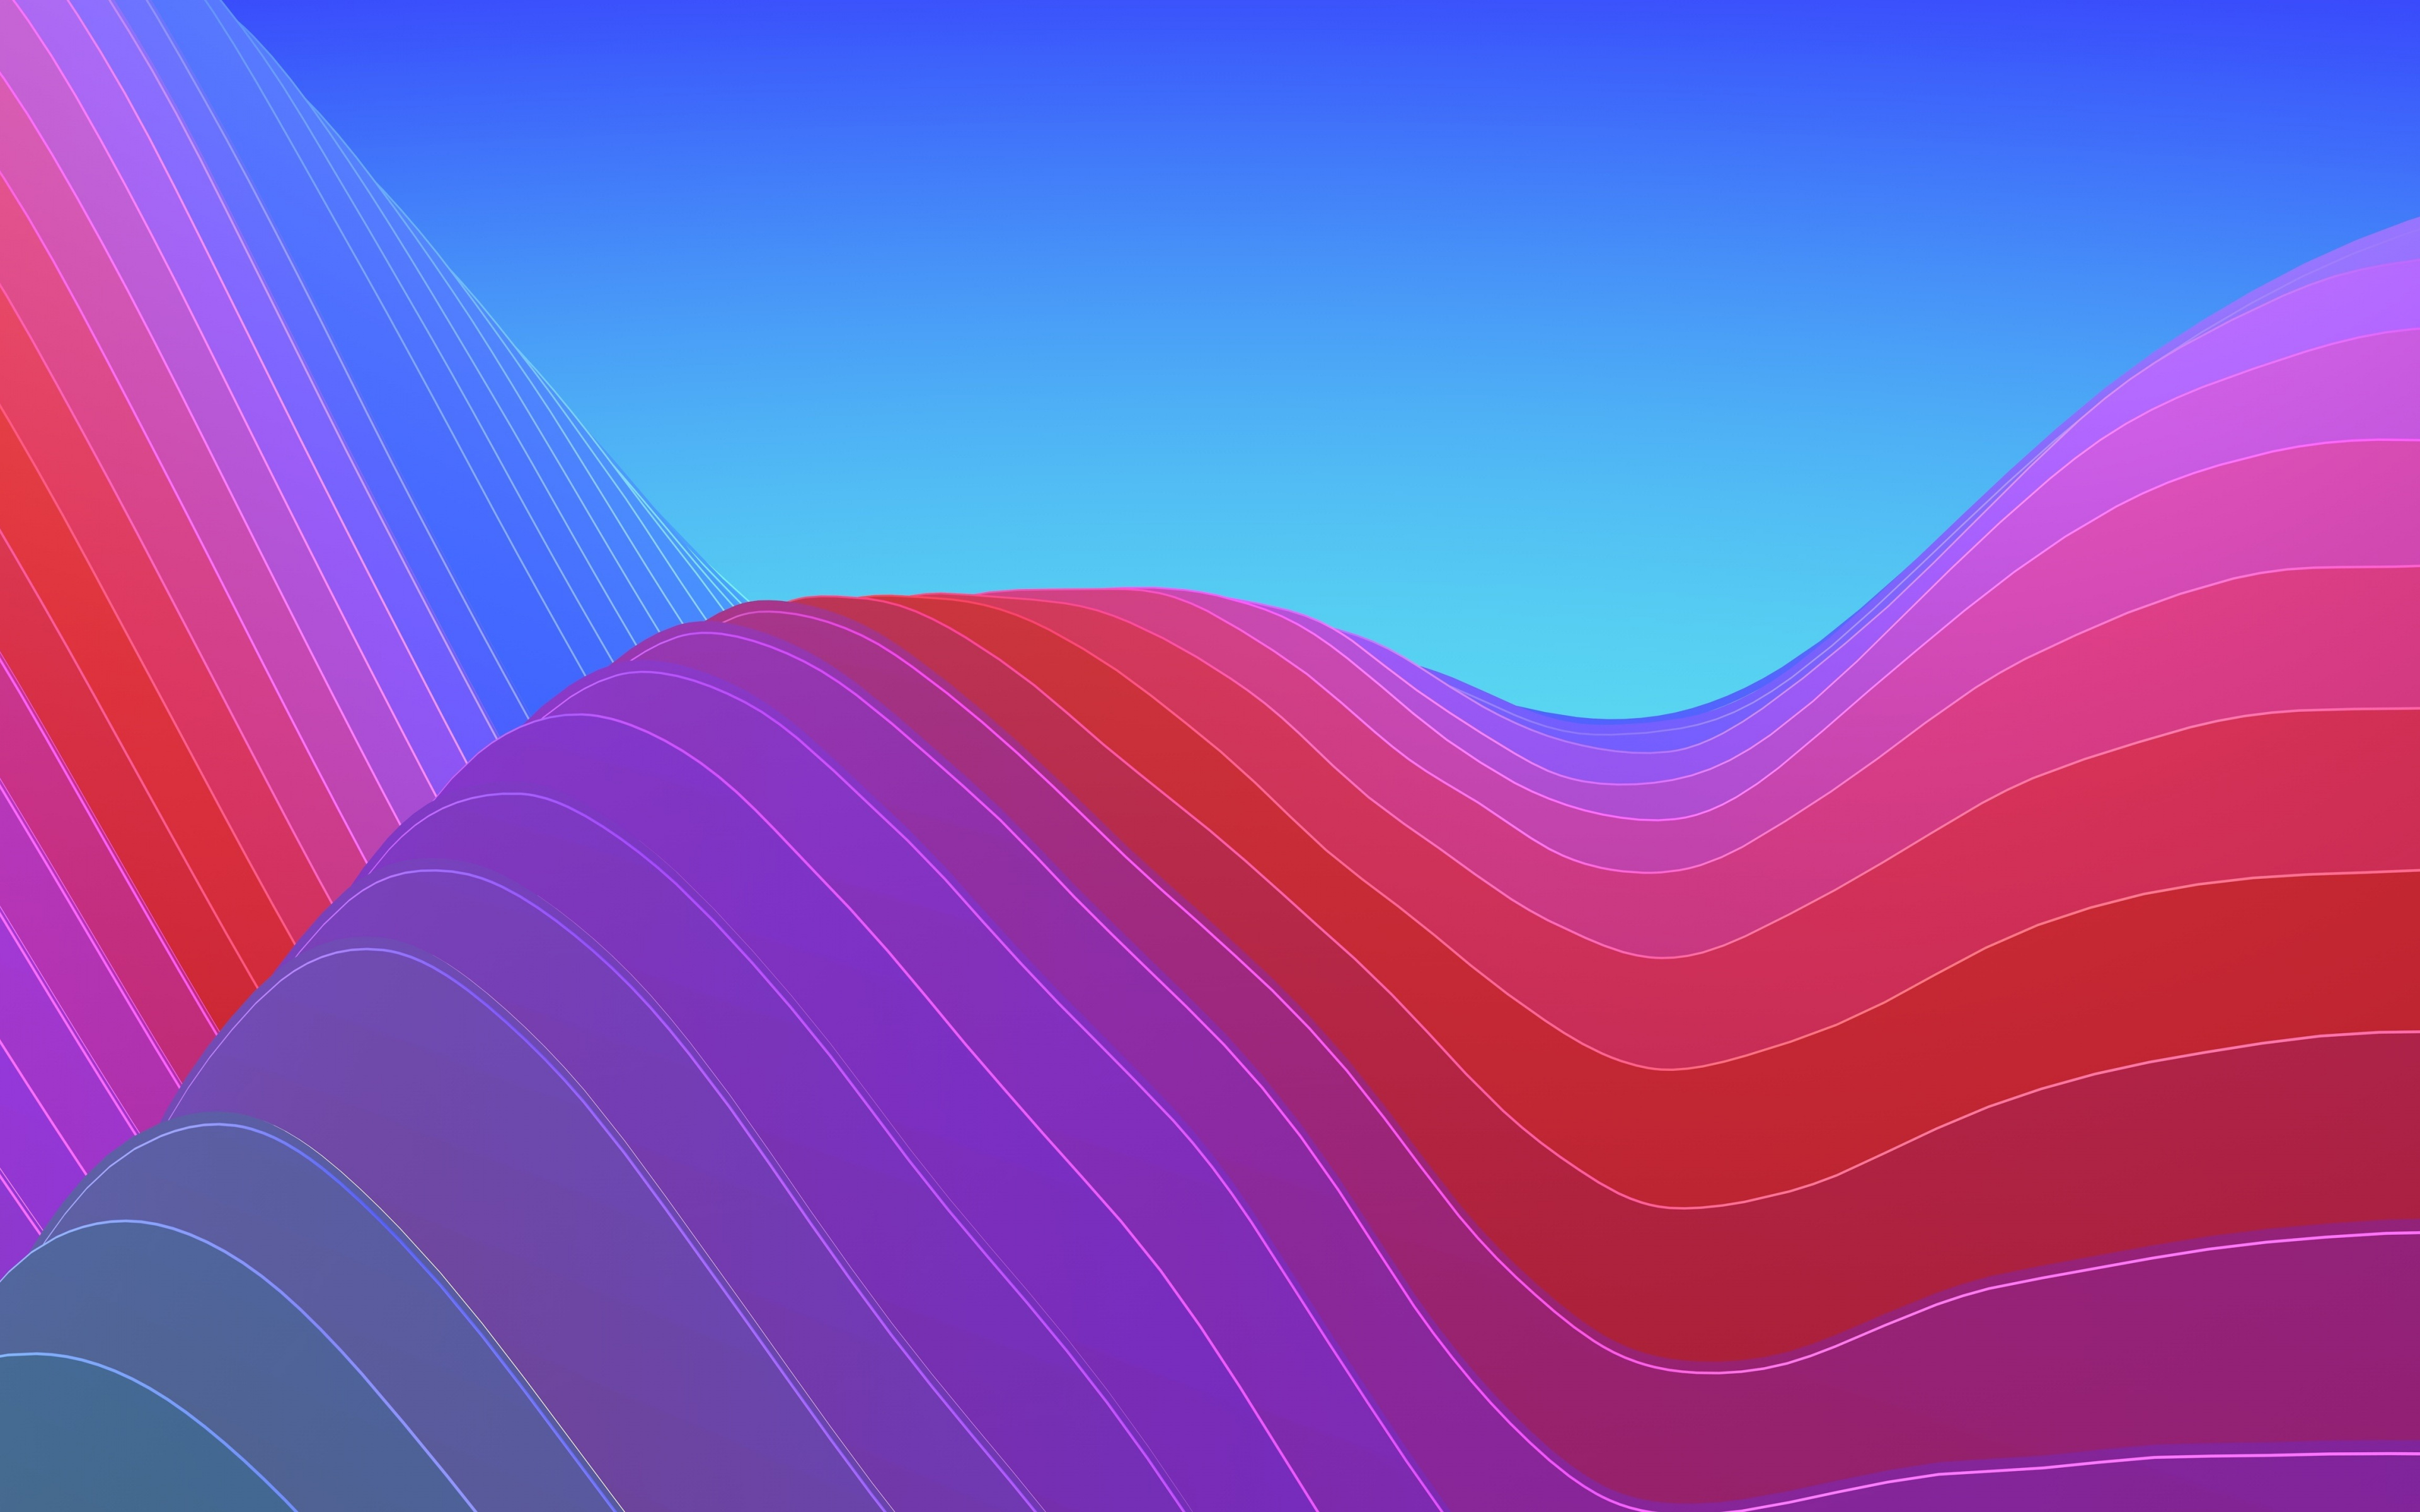 Download 3840x2400 wallpaper waves, abstract, gradient, ios 11